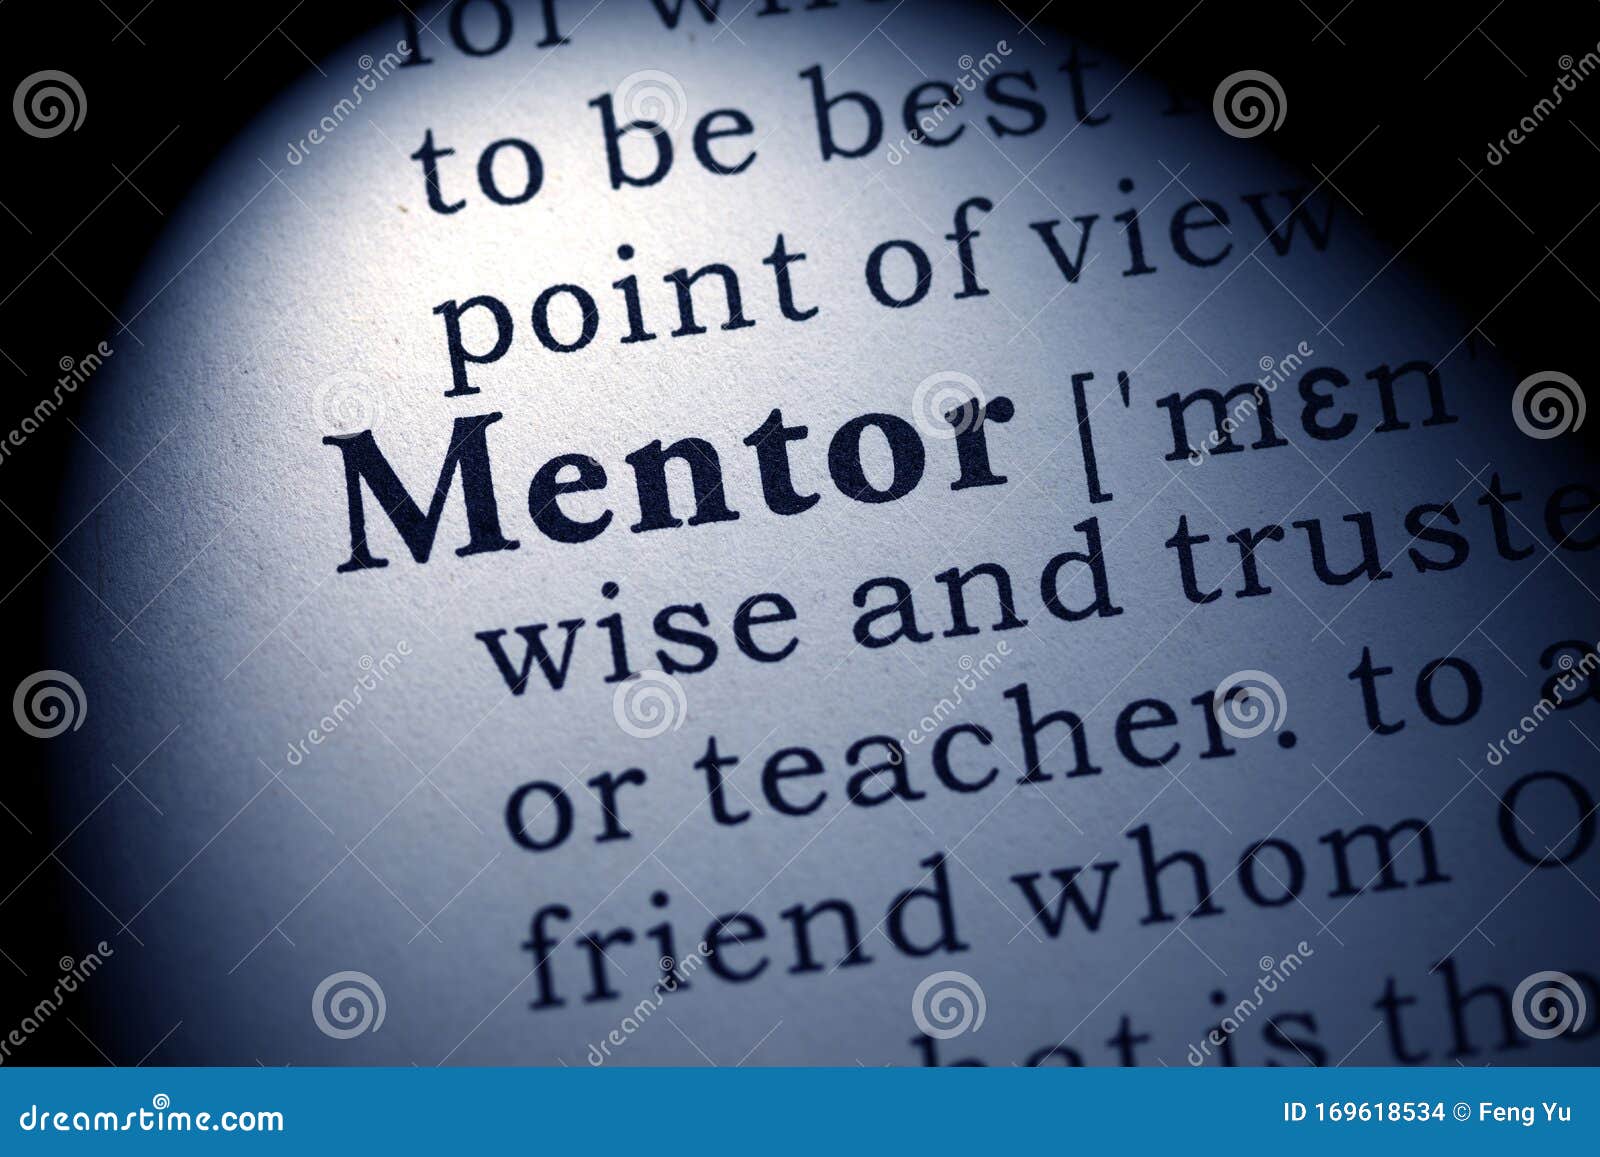 Definition of Word Mentor Stock Photo Image of dictionary, word: 169618534